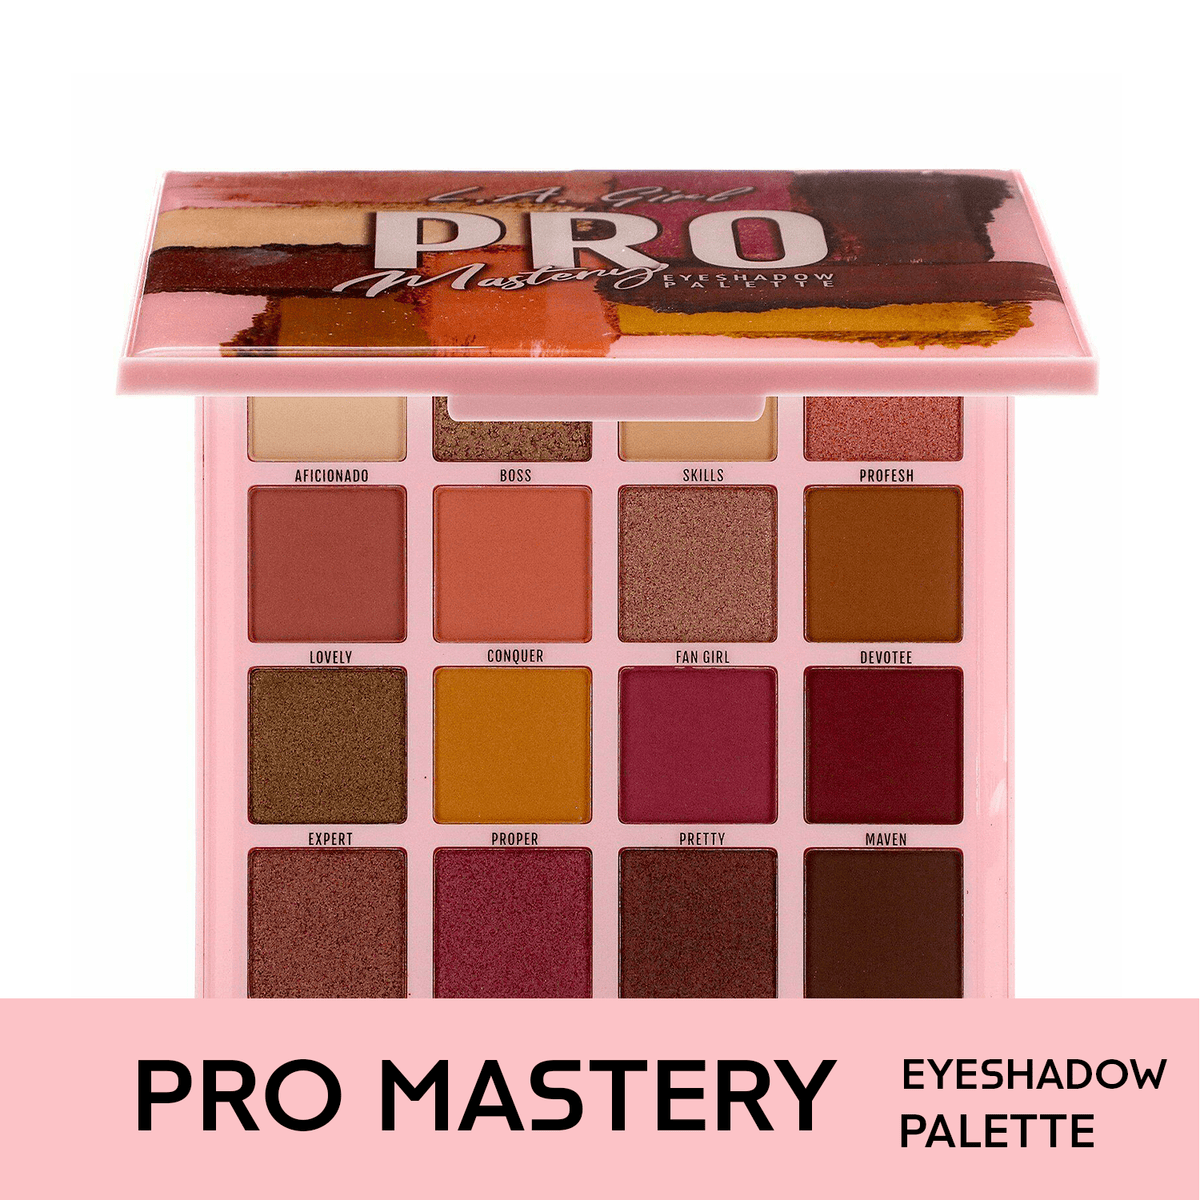 L.A GIRL PRO MASTERY EYESHADOW PALETTE 16 COLORS